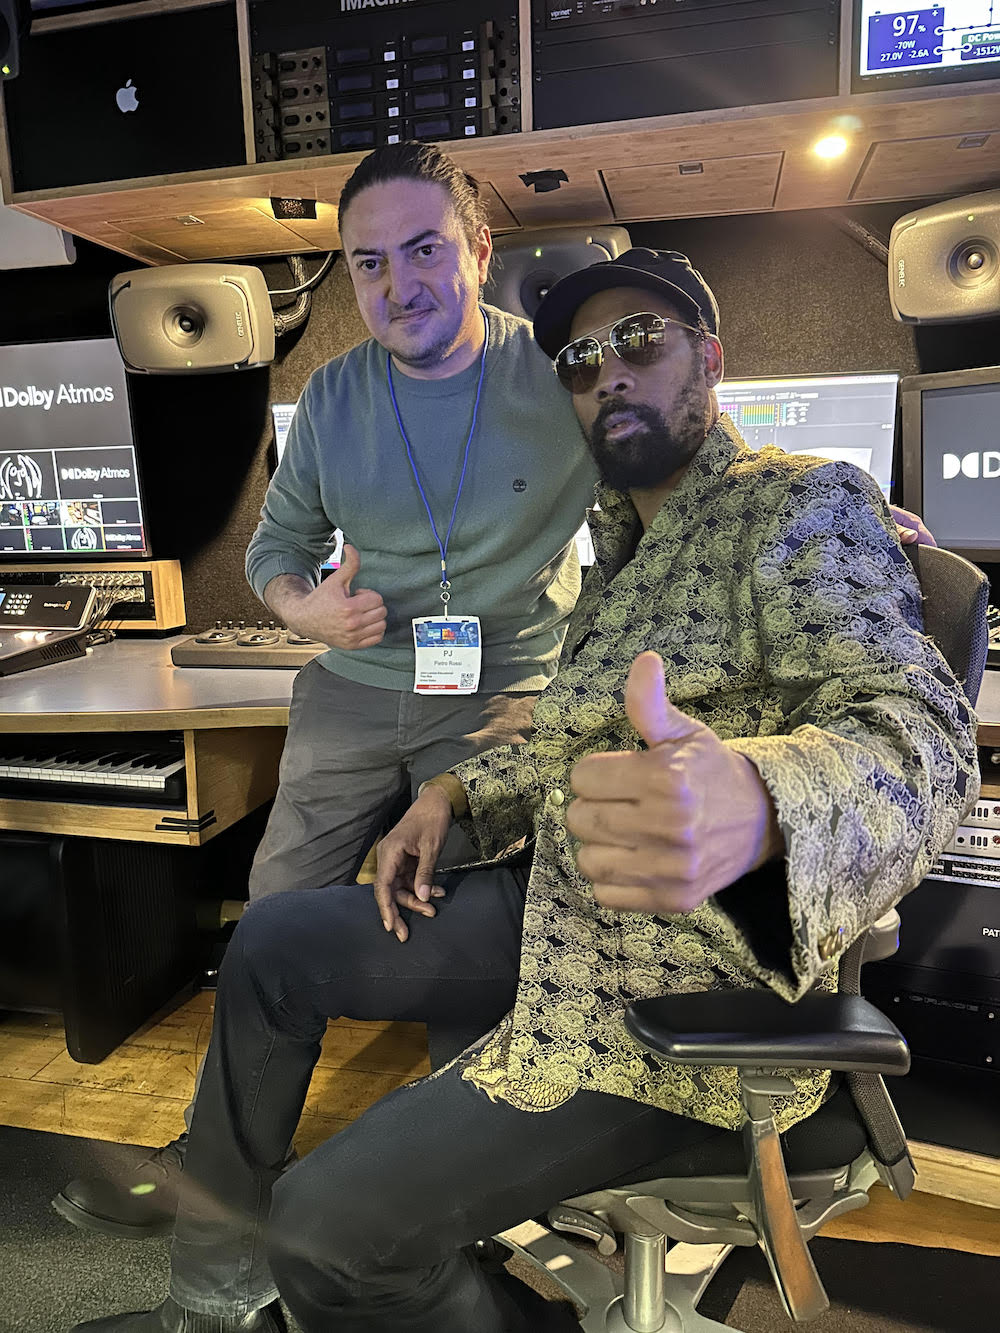 Wu-Tang Clan’s RZA (seated) worked with Pietro Rossi (standing) on Atmos mixes in the Lennon Bus throughout the group’s recent tour. Photo: John Lennon Educational Tour Bu